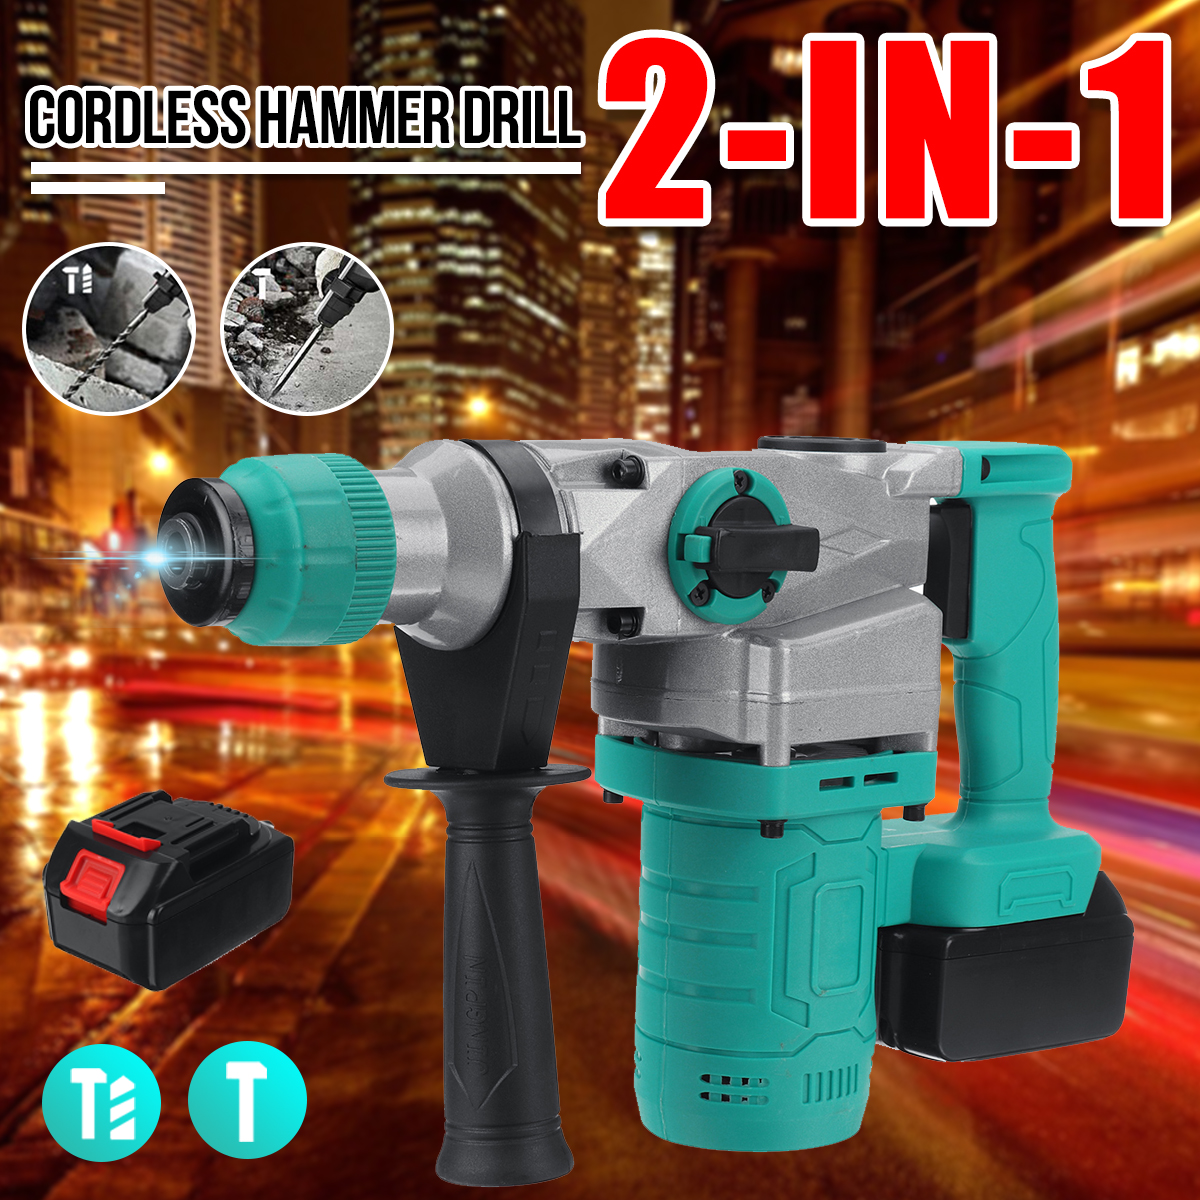 Brushless-Cordless-Electric-Hammer-Drill-Wood-Concrete-Wall-Drilling-Slotting-Tool-W-None-or-1pc-Bat-1878668-1